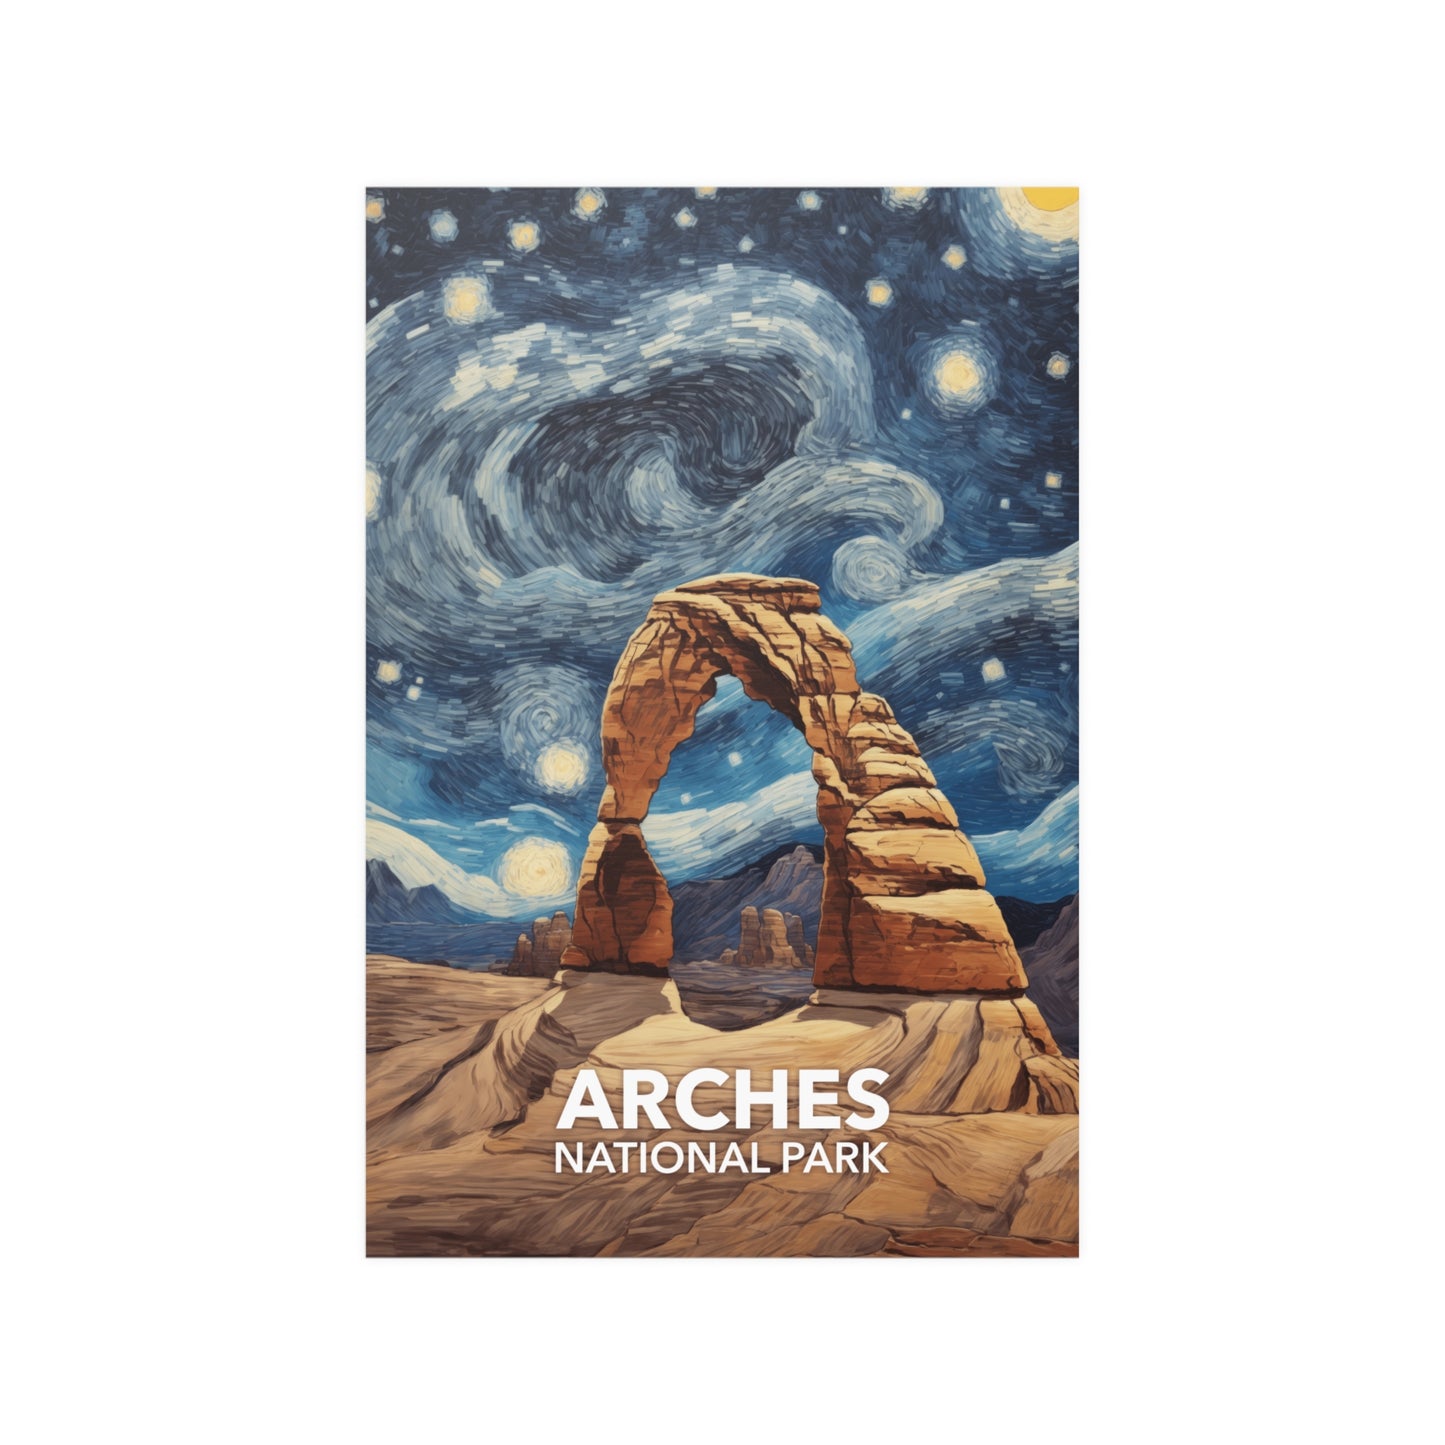 Arches National Park Poster - Starry Night